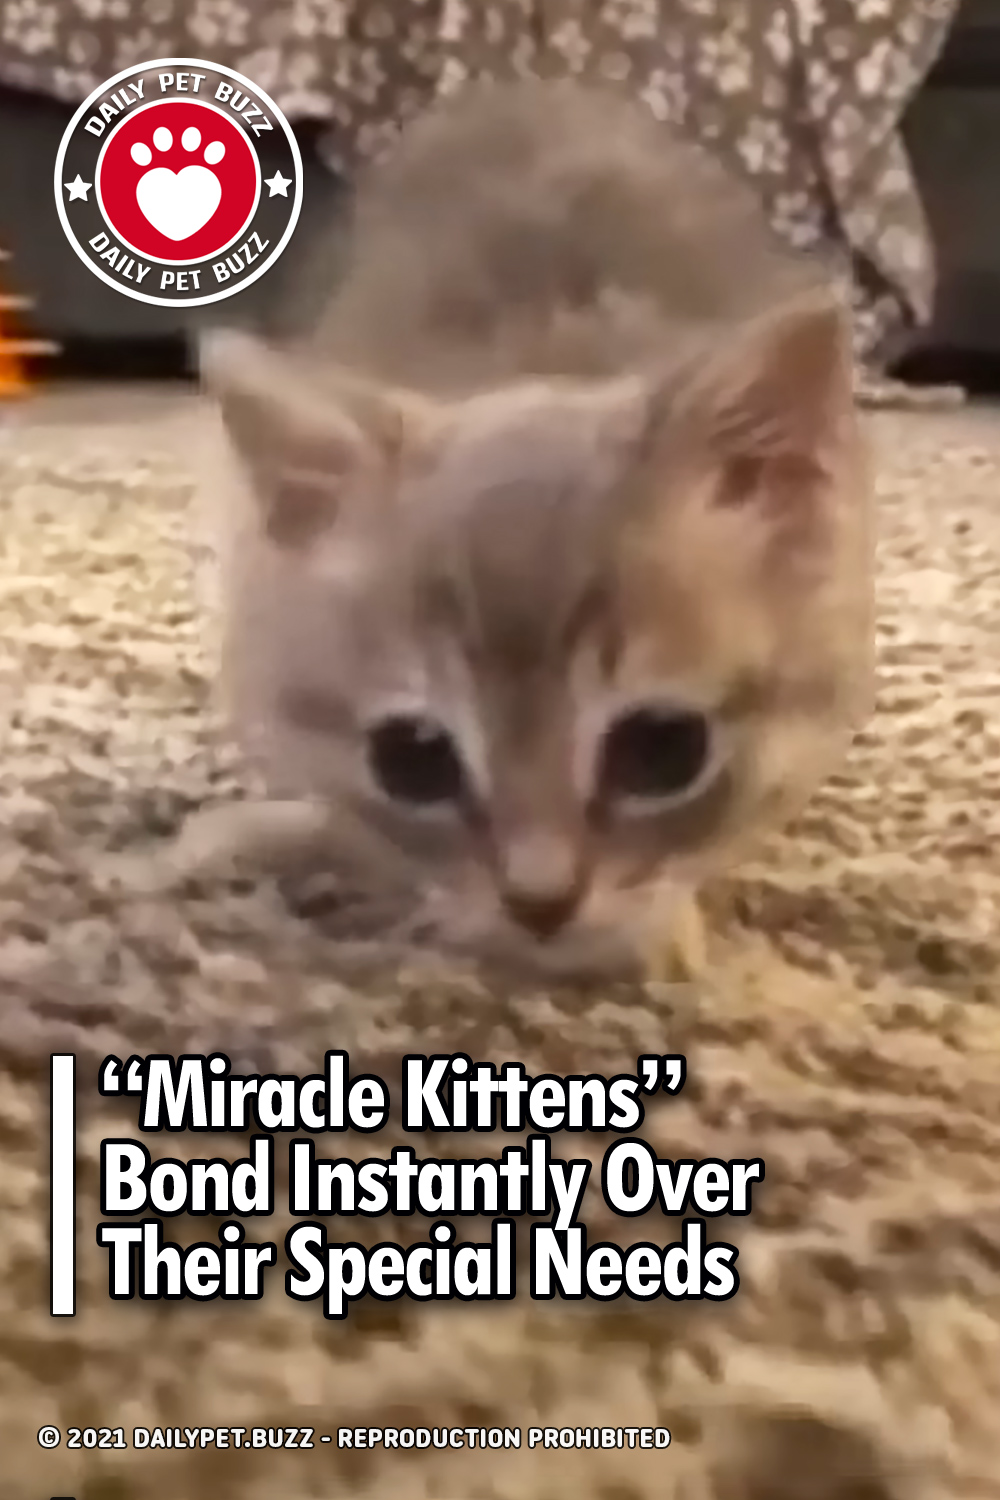 “Miracle Kittens” Bond Instantly Over Their Special Needs